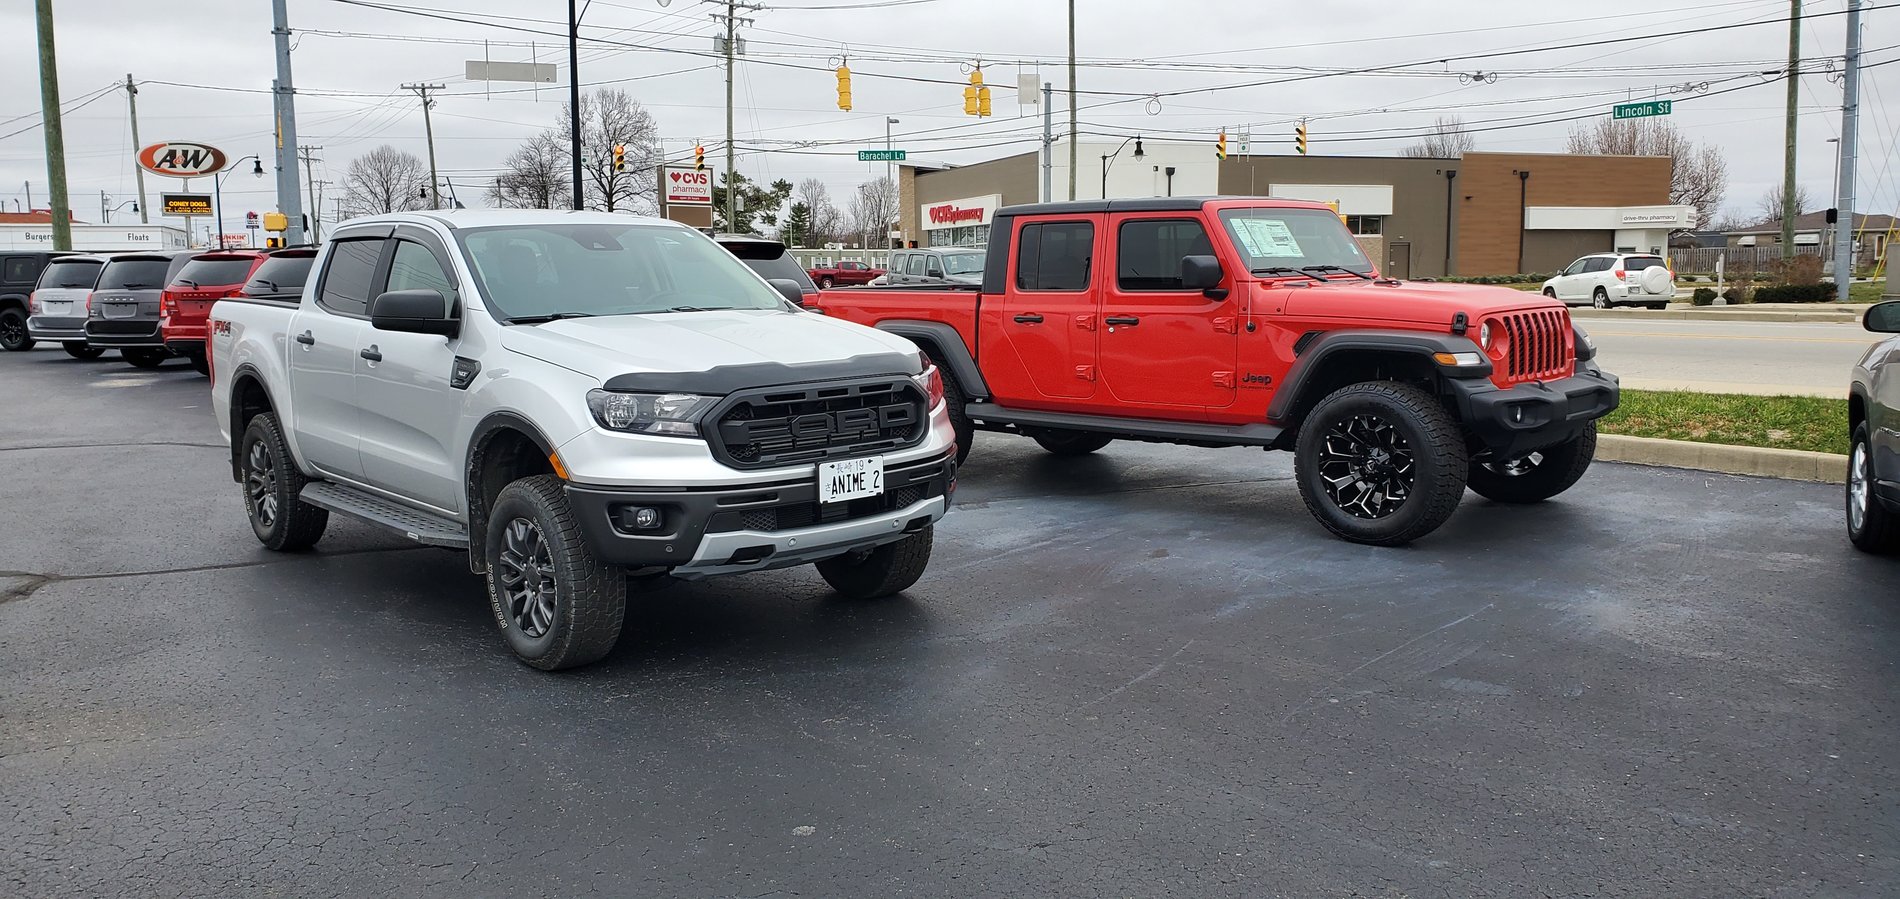 Ford Ranger Look at my Ranger parked next to stuff 20191128_145313